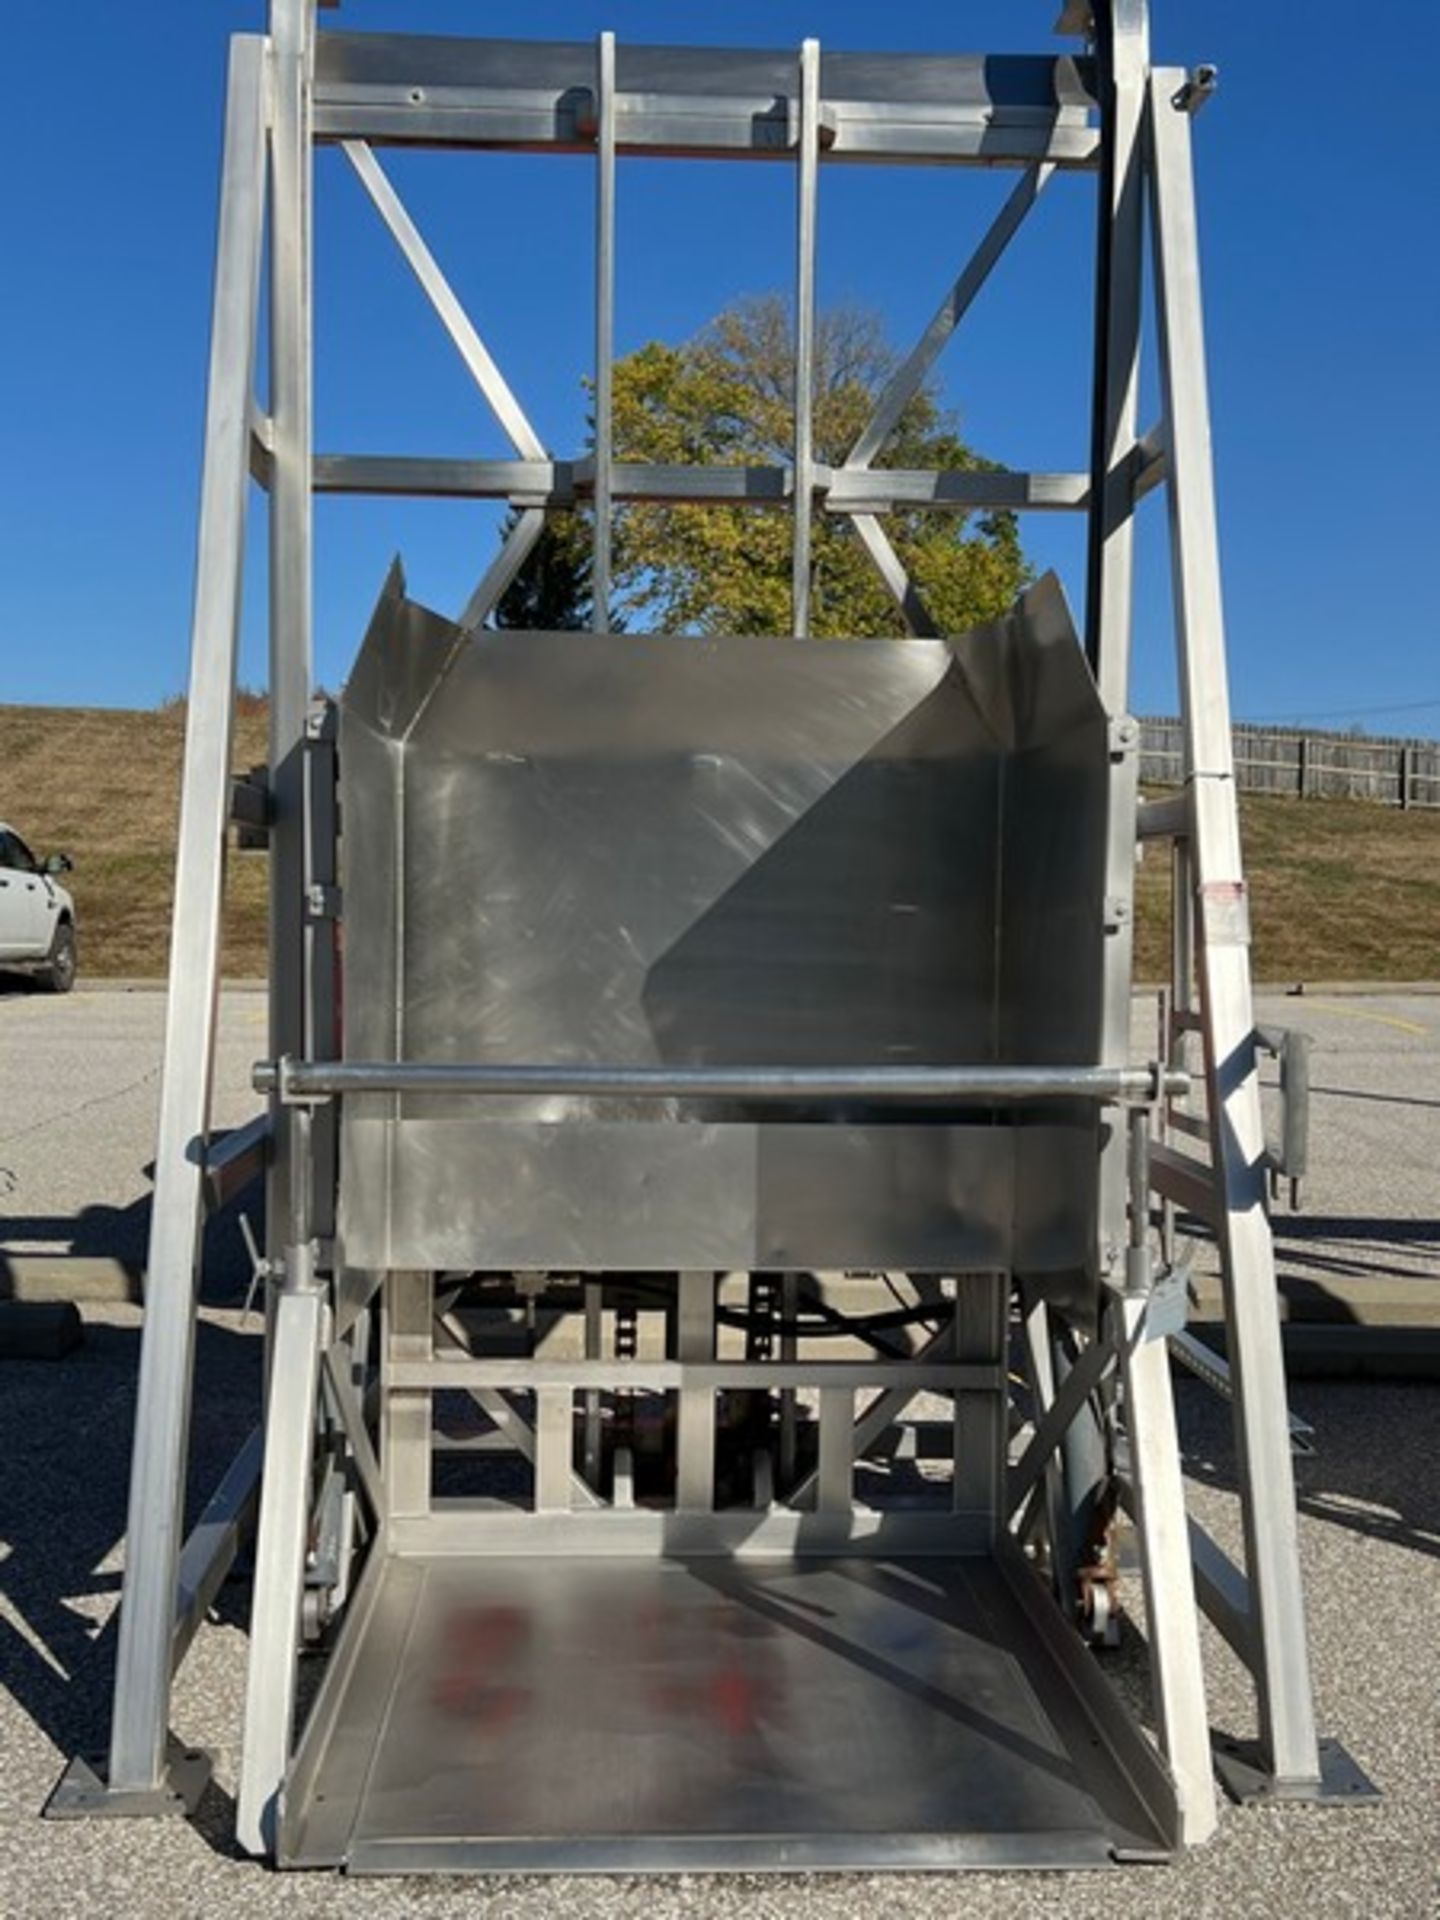 MTC 3,000 LB TOTE DUMP COLUMN, MODEL H-LEC, S/N 073599, APPROX. 132” DUMP HEIGHT, FOR APPROX . 52” L - Image 2 of 5